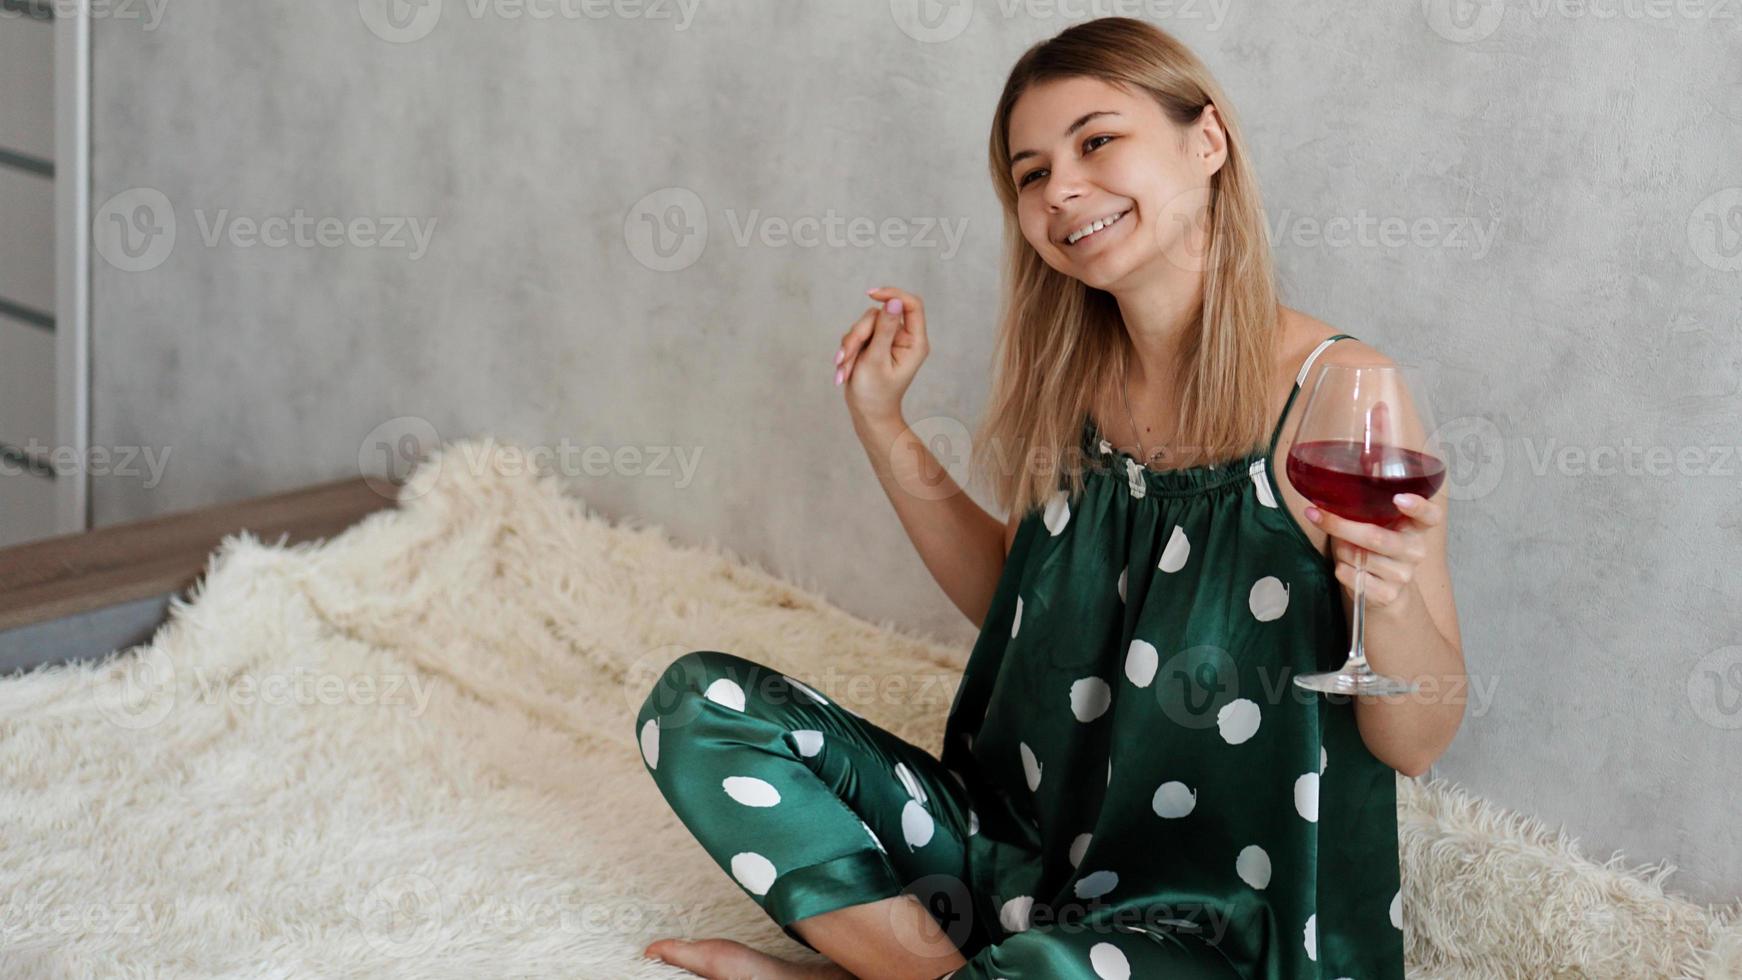 Girl in green pajamas in bed with a glass of red wine photo